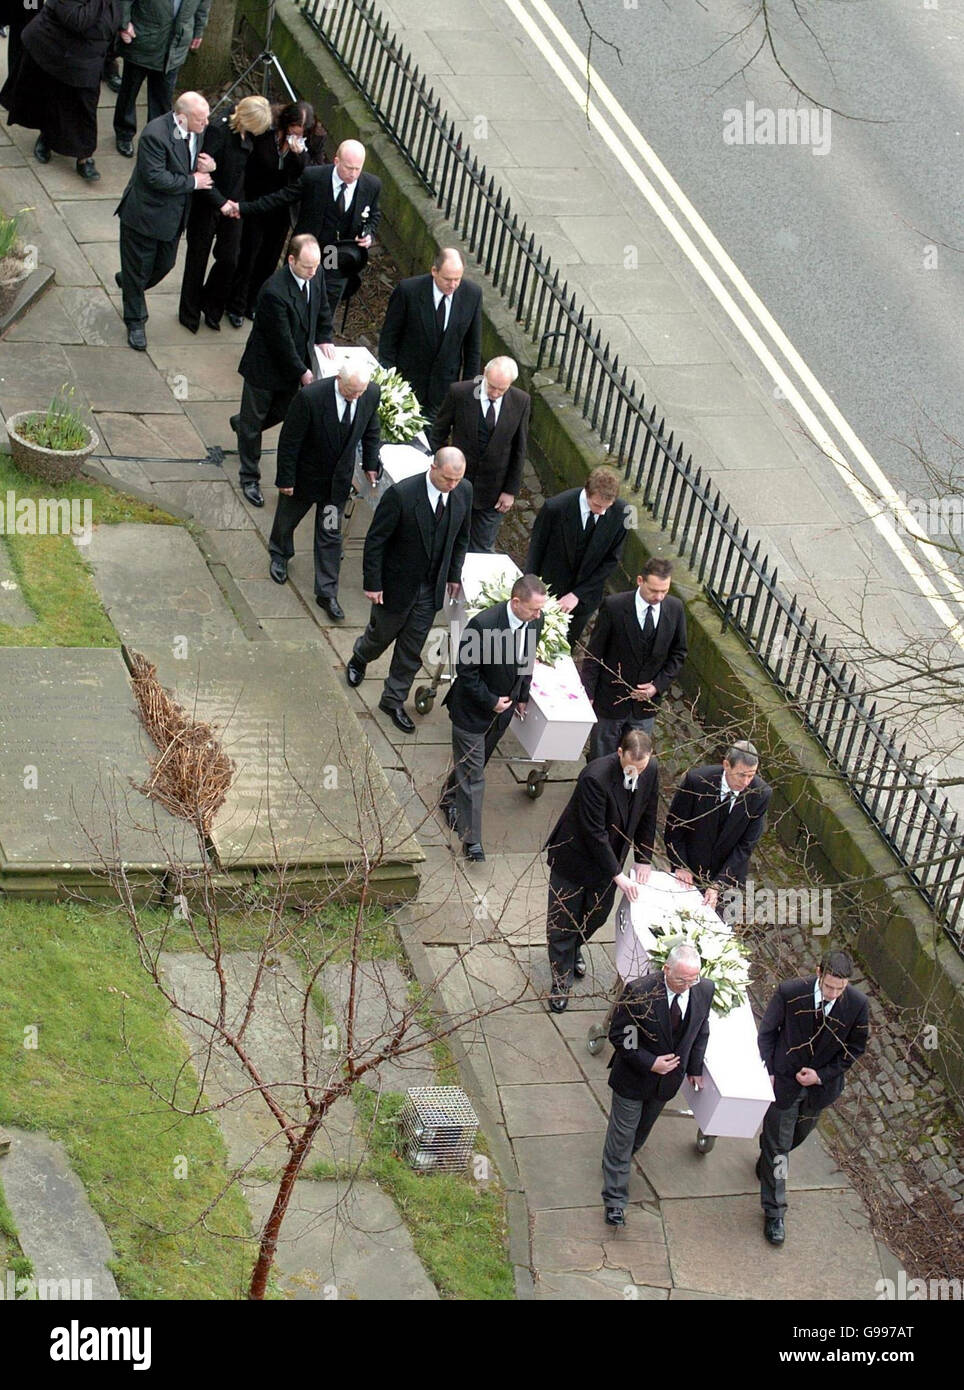 Mandy Carter (top left, blonde hair) follows the funeral cortege of her three children, Samantha, Patricia and Marcus Carter, as it arrives at St. Edward's Church in Leek, Staffordshire, Thursday April 6, 2006. The siblings died in an alleged arson attack at their semi-detached house in Hillside Road, Cheddleton, on March 9, with their mother's partner Roderick Hine. See PA story FUNERAL Children. Stock Photo